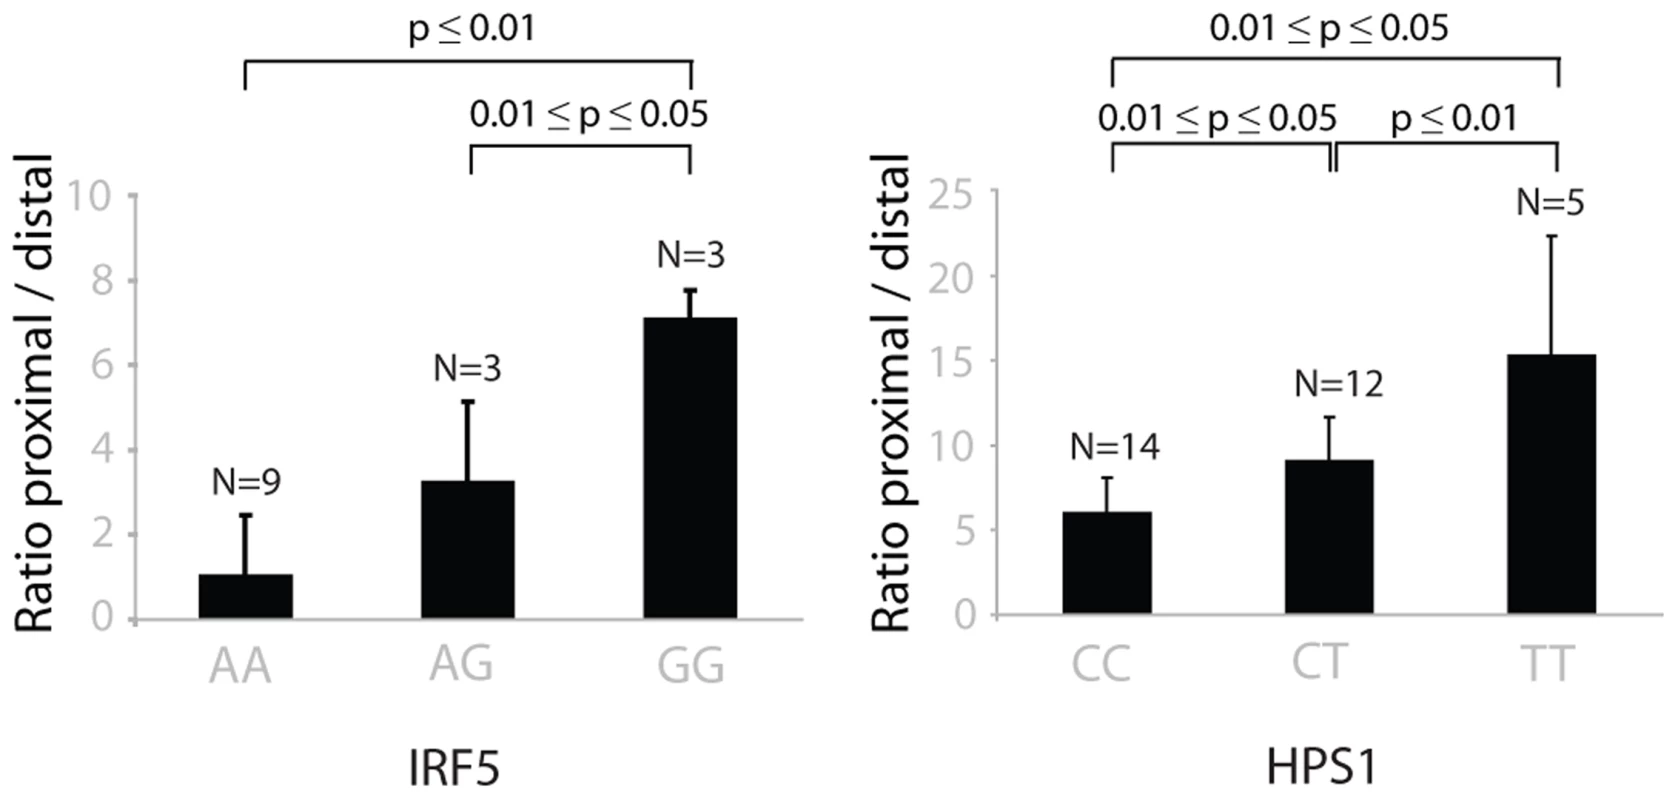 The choice of proximal/distal polyadenylation site in genes <i>IRF5</i> and <i>HPS1</i> depends on the genotypes of rs10488630 and rs11189600, respectively.